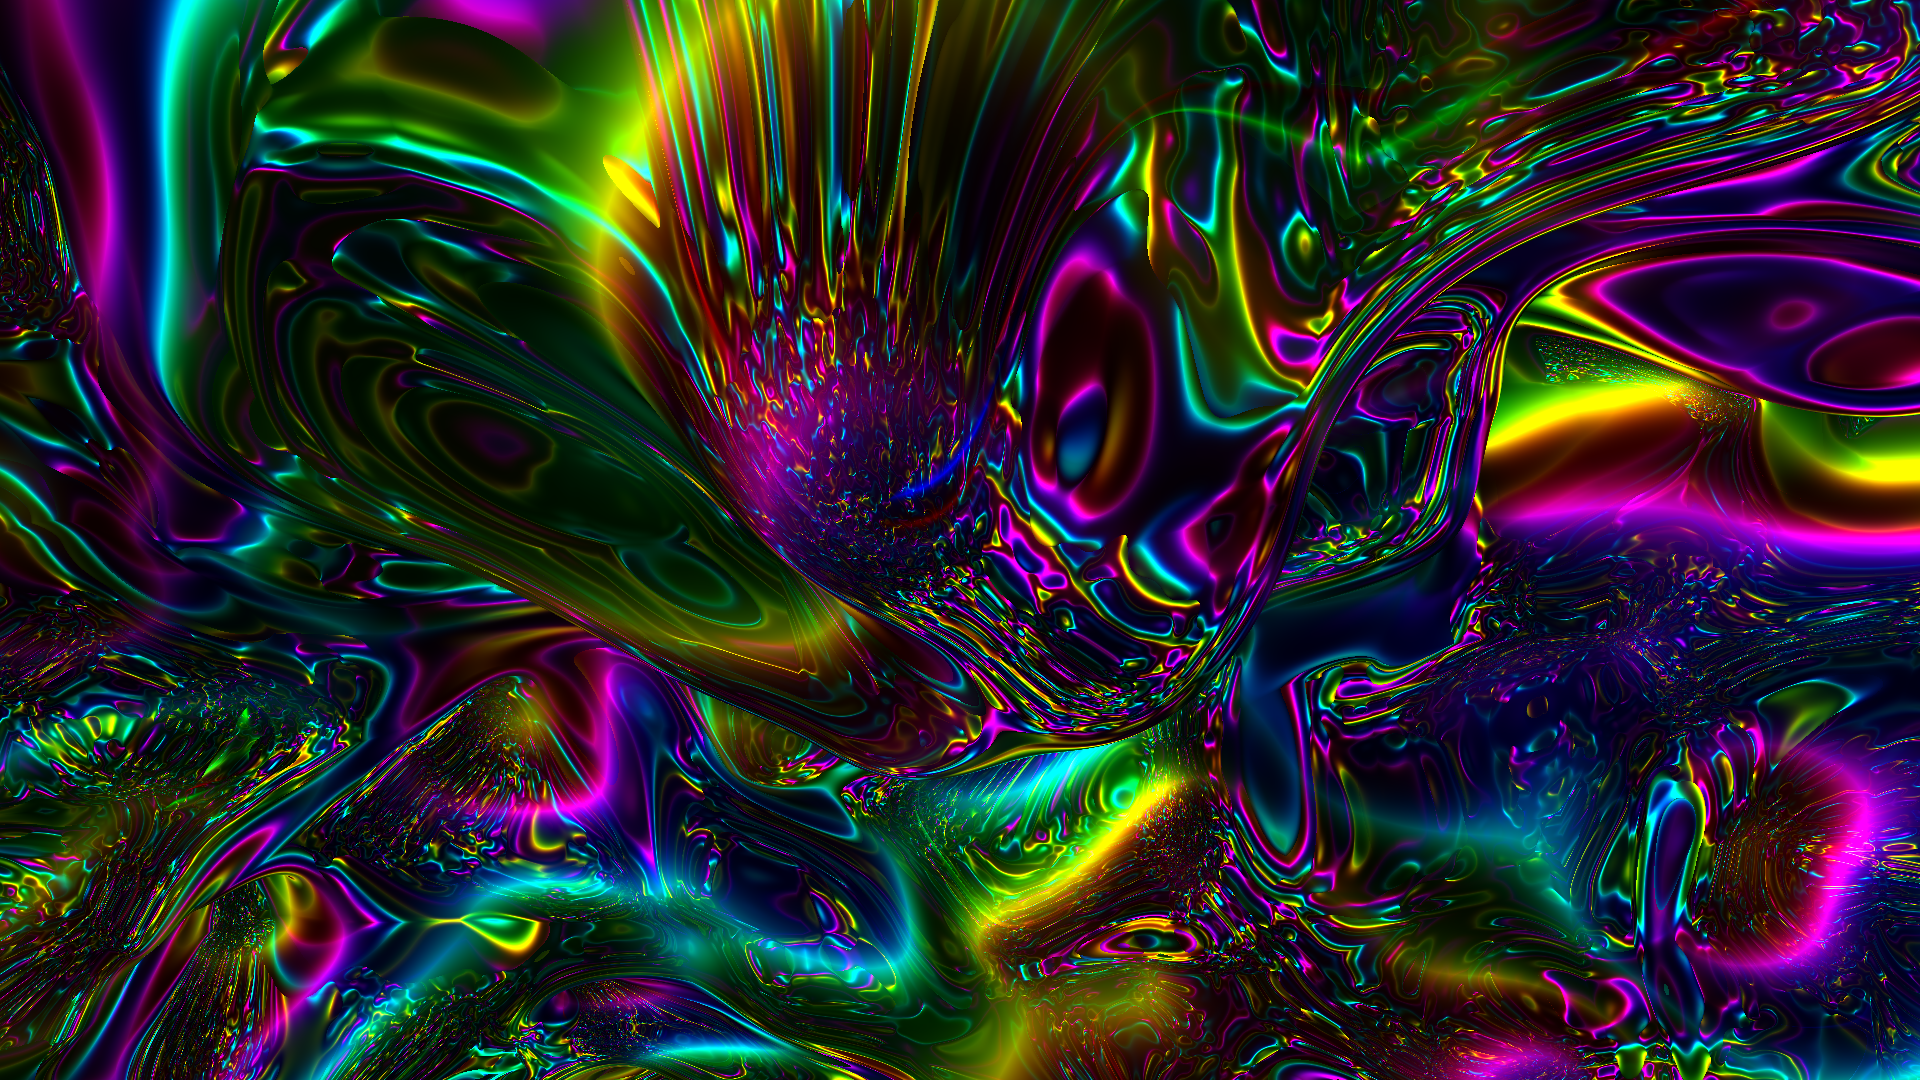 Psychedelic Wallpaper 1080p Displaying Image For